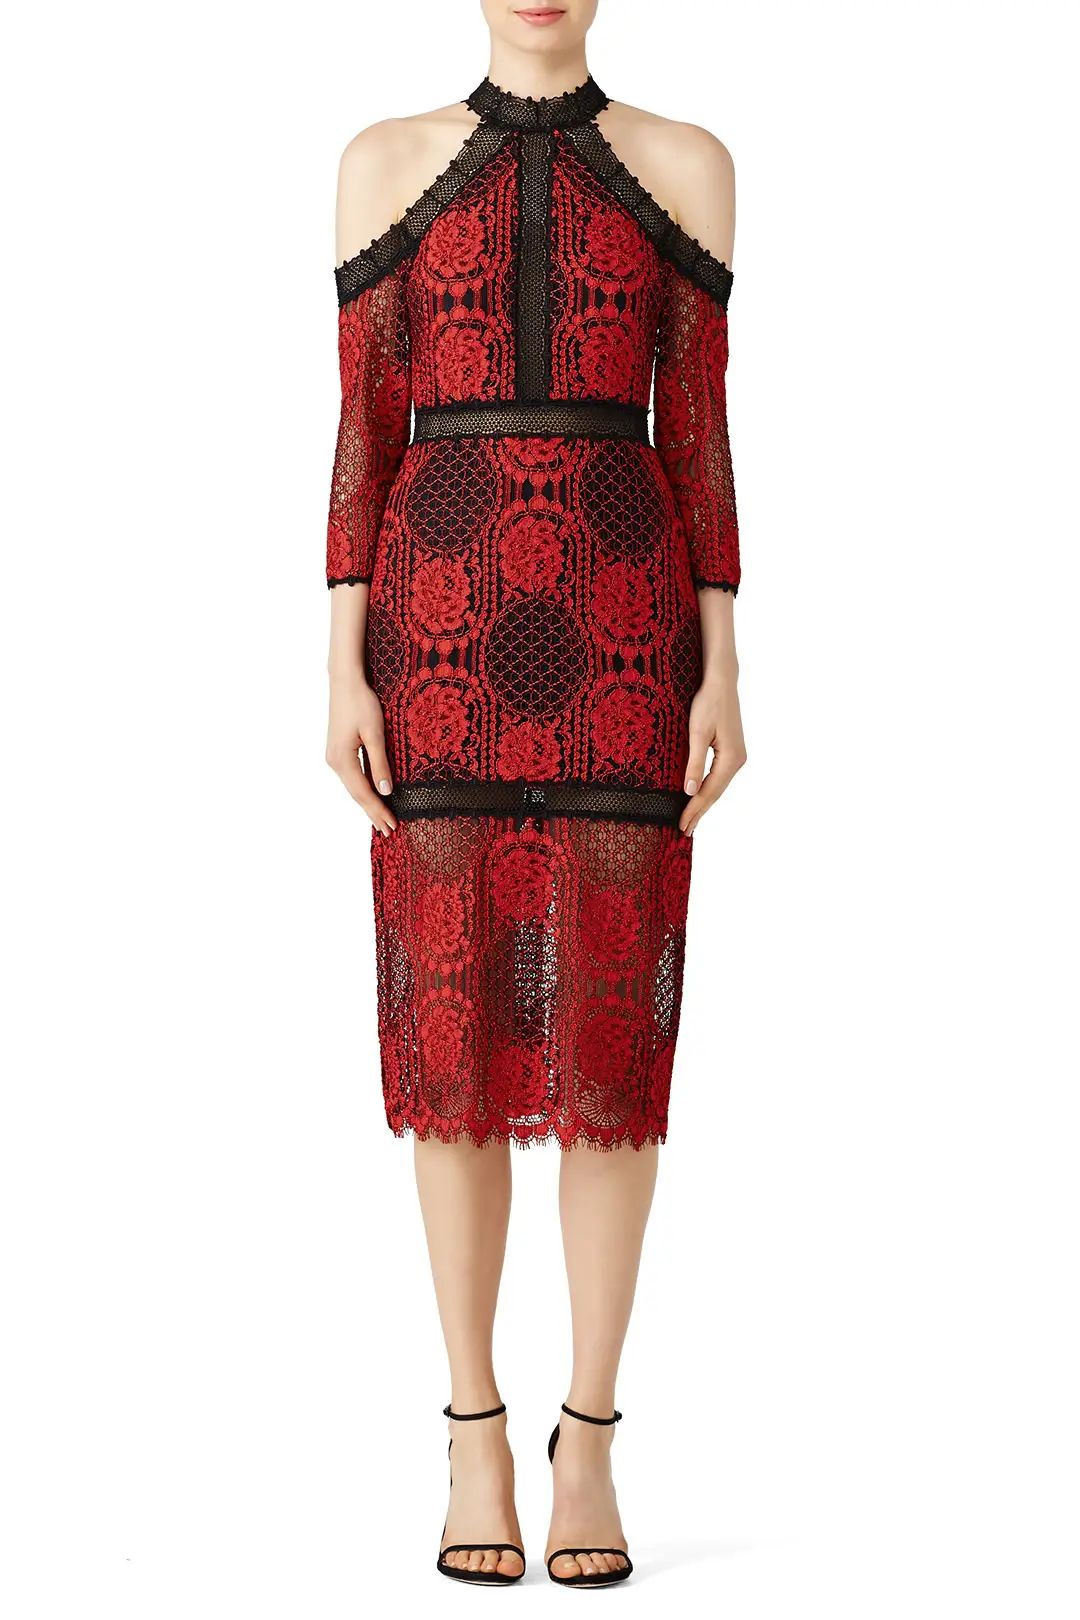 Alexis Red Lace Marlow Dress | Rent The Runway